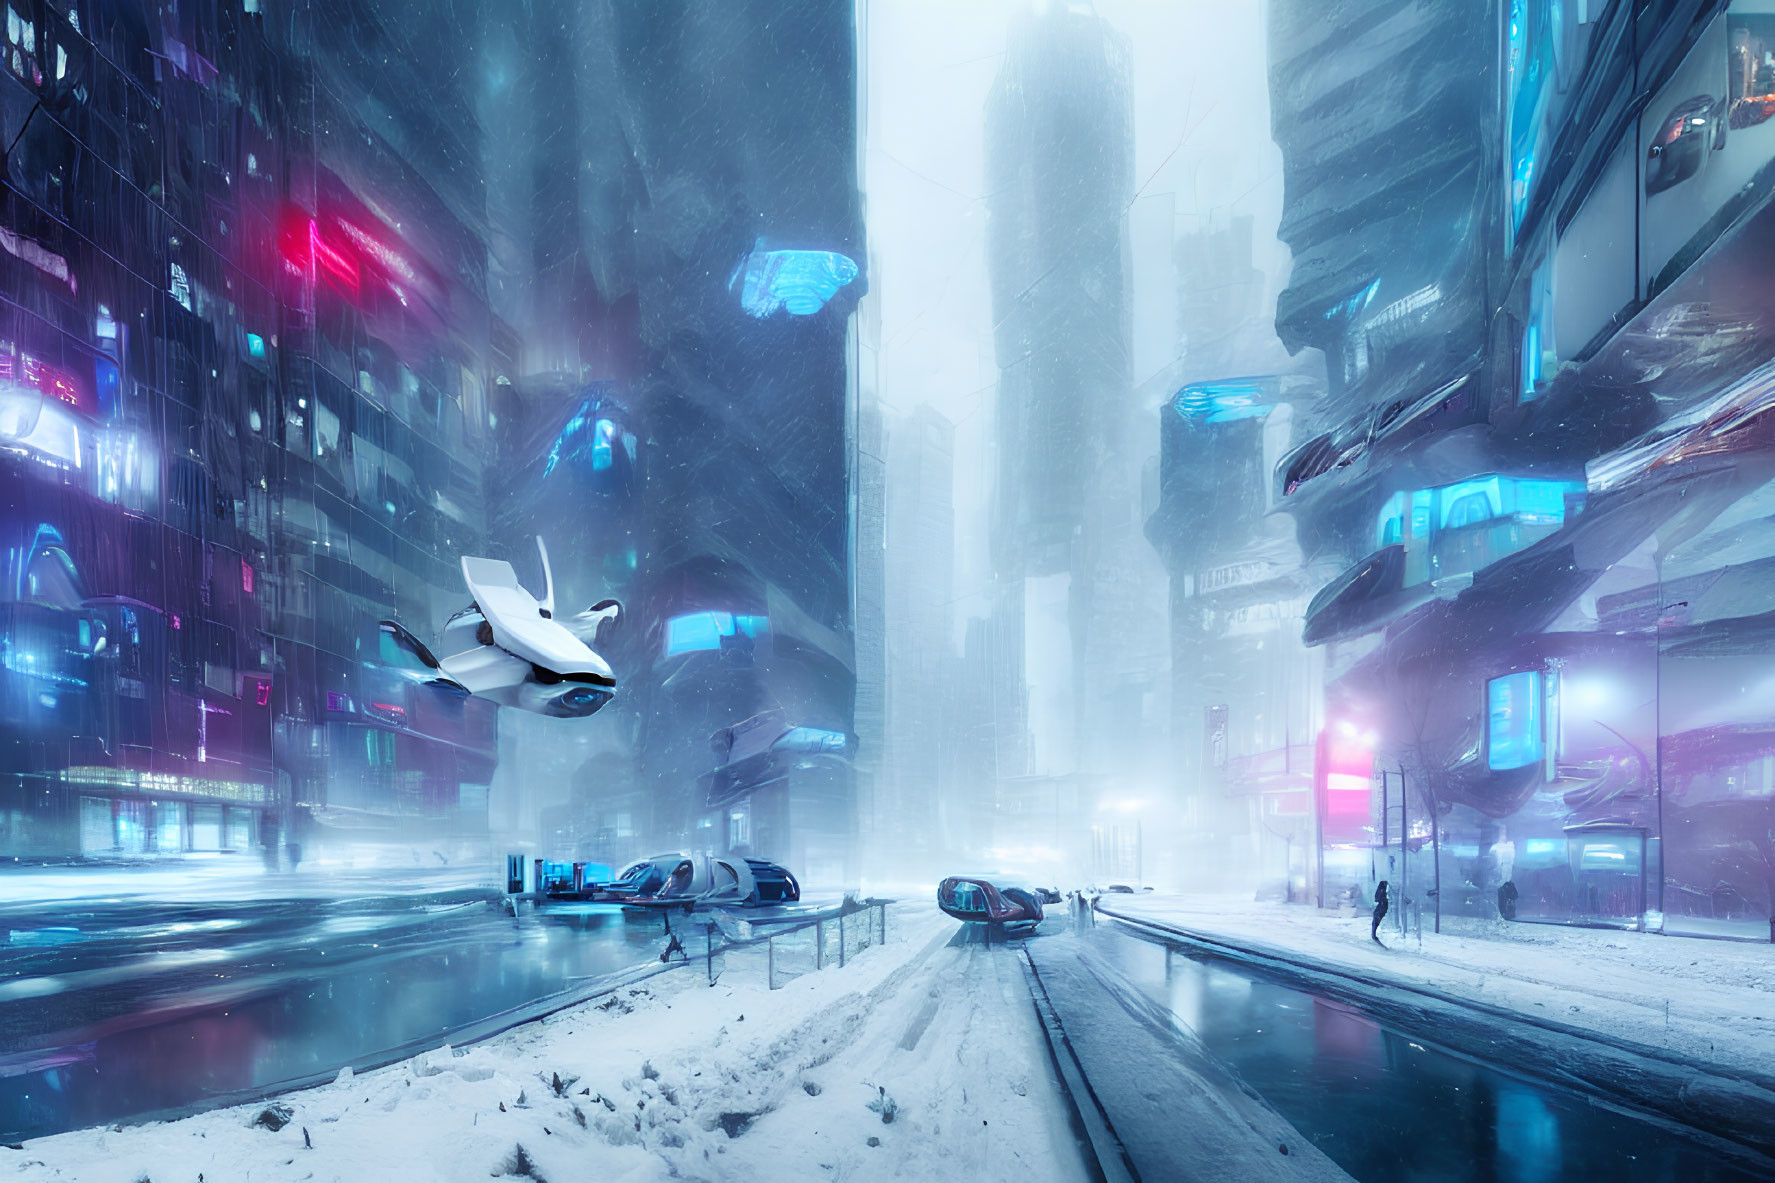 Futuristic snowstorm cityscape with flying cars and neon skyscrapers